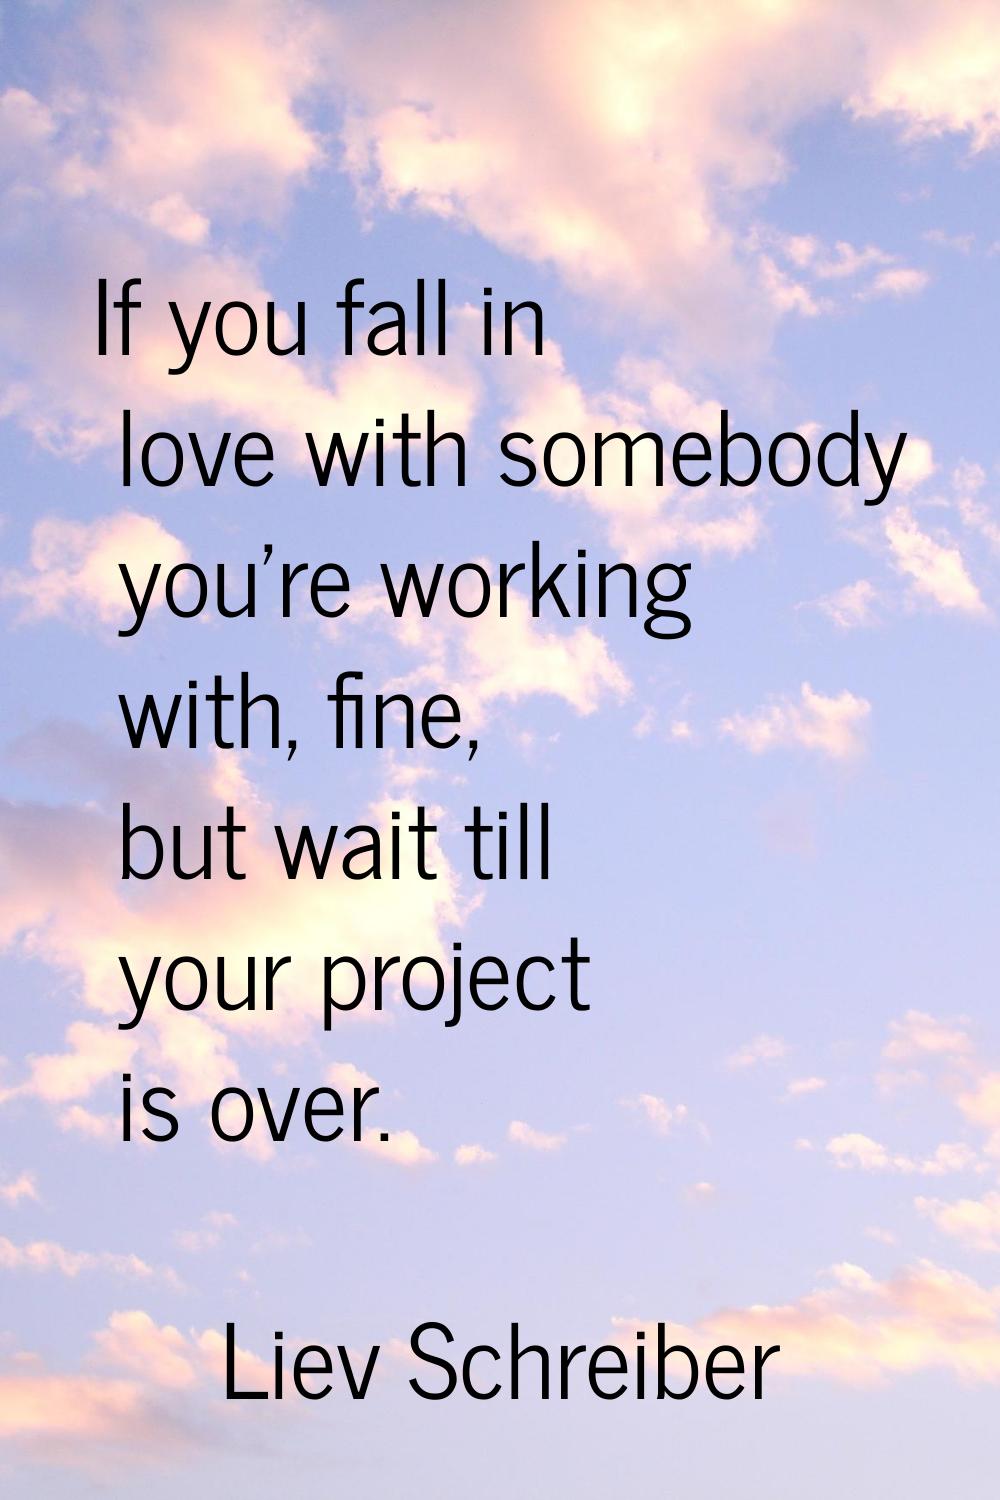 If you fall in love with somebody you're working with, fine, but wait till your project is over.